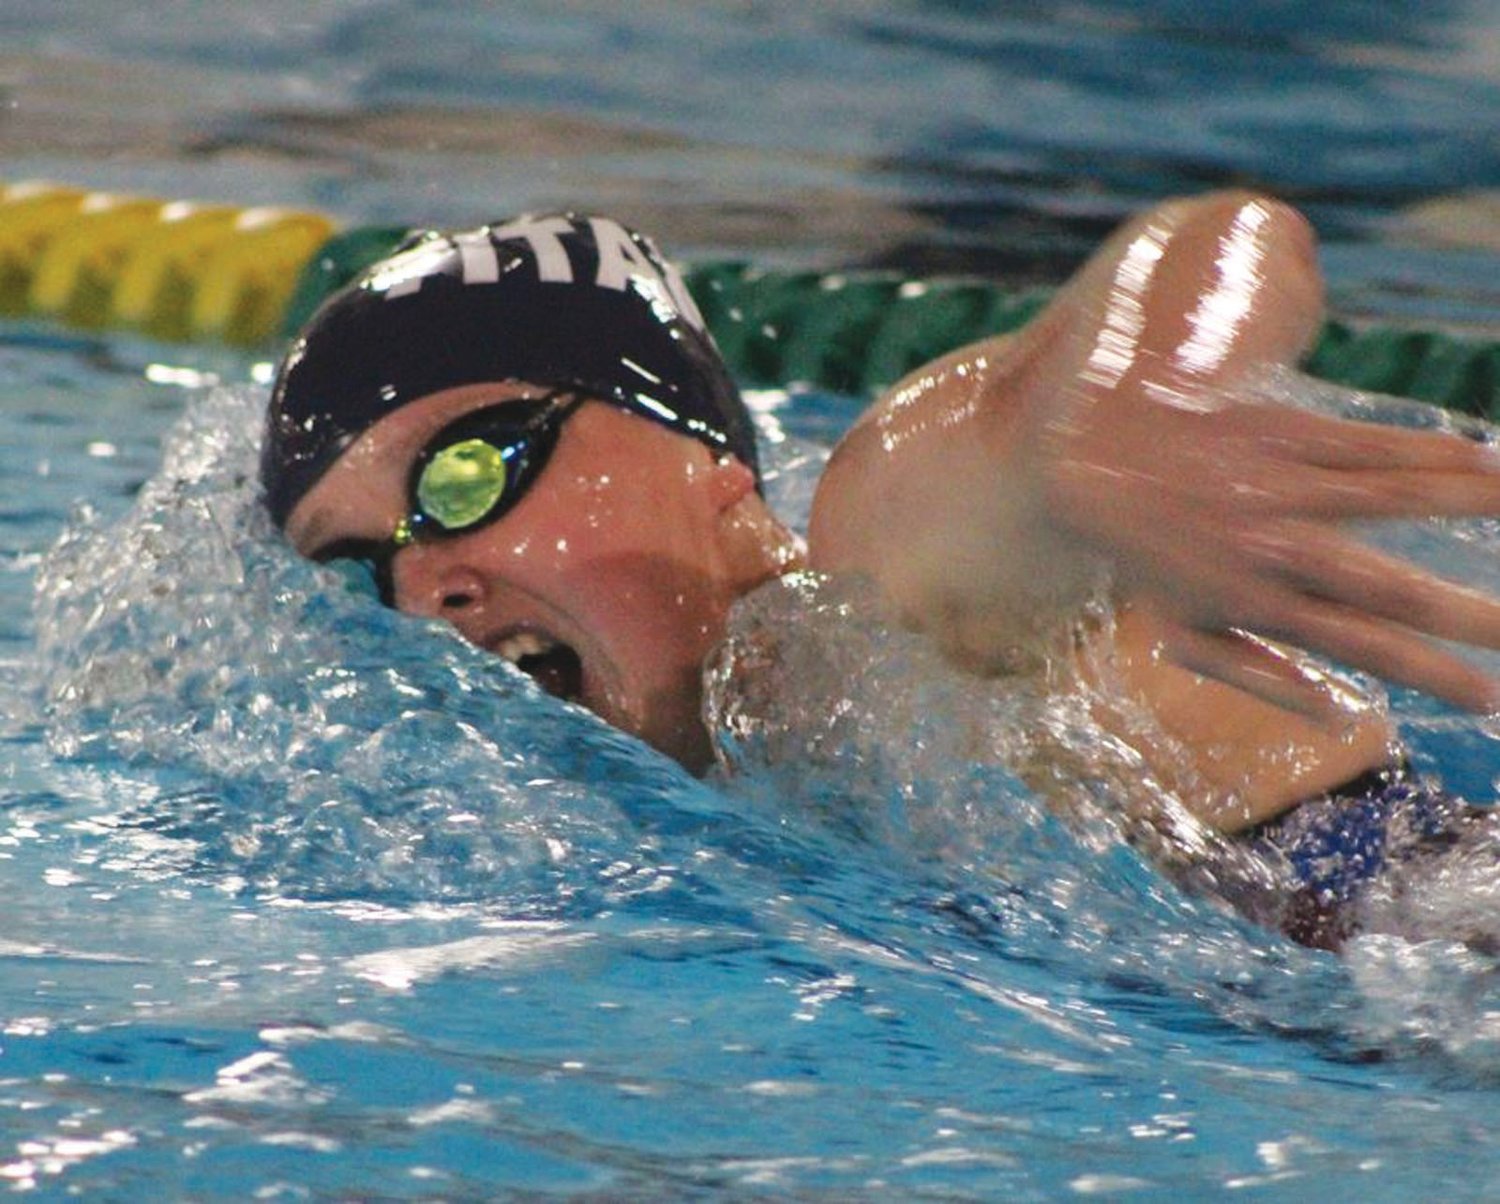 LEADING THE WAY: Toll Gate captain Oce Lowe competes in the 500 freestyle. (Photos by Alex Sponseller)